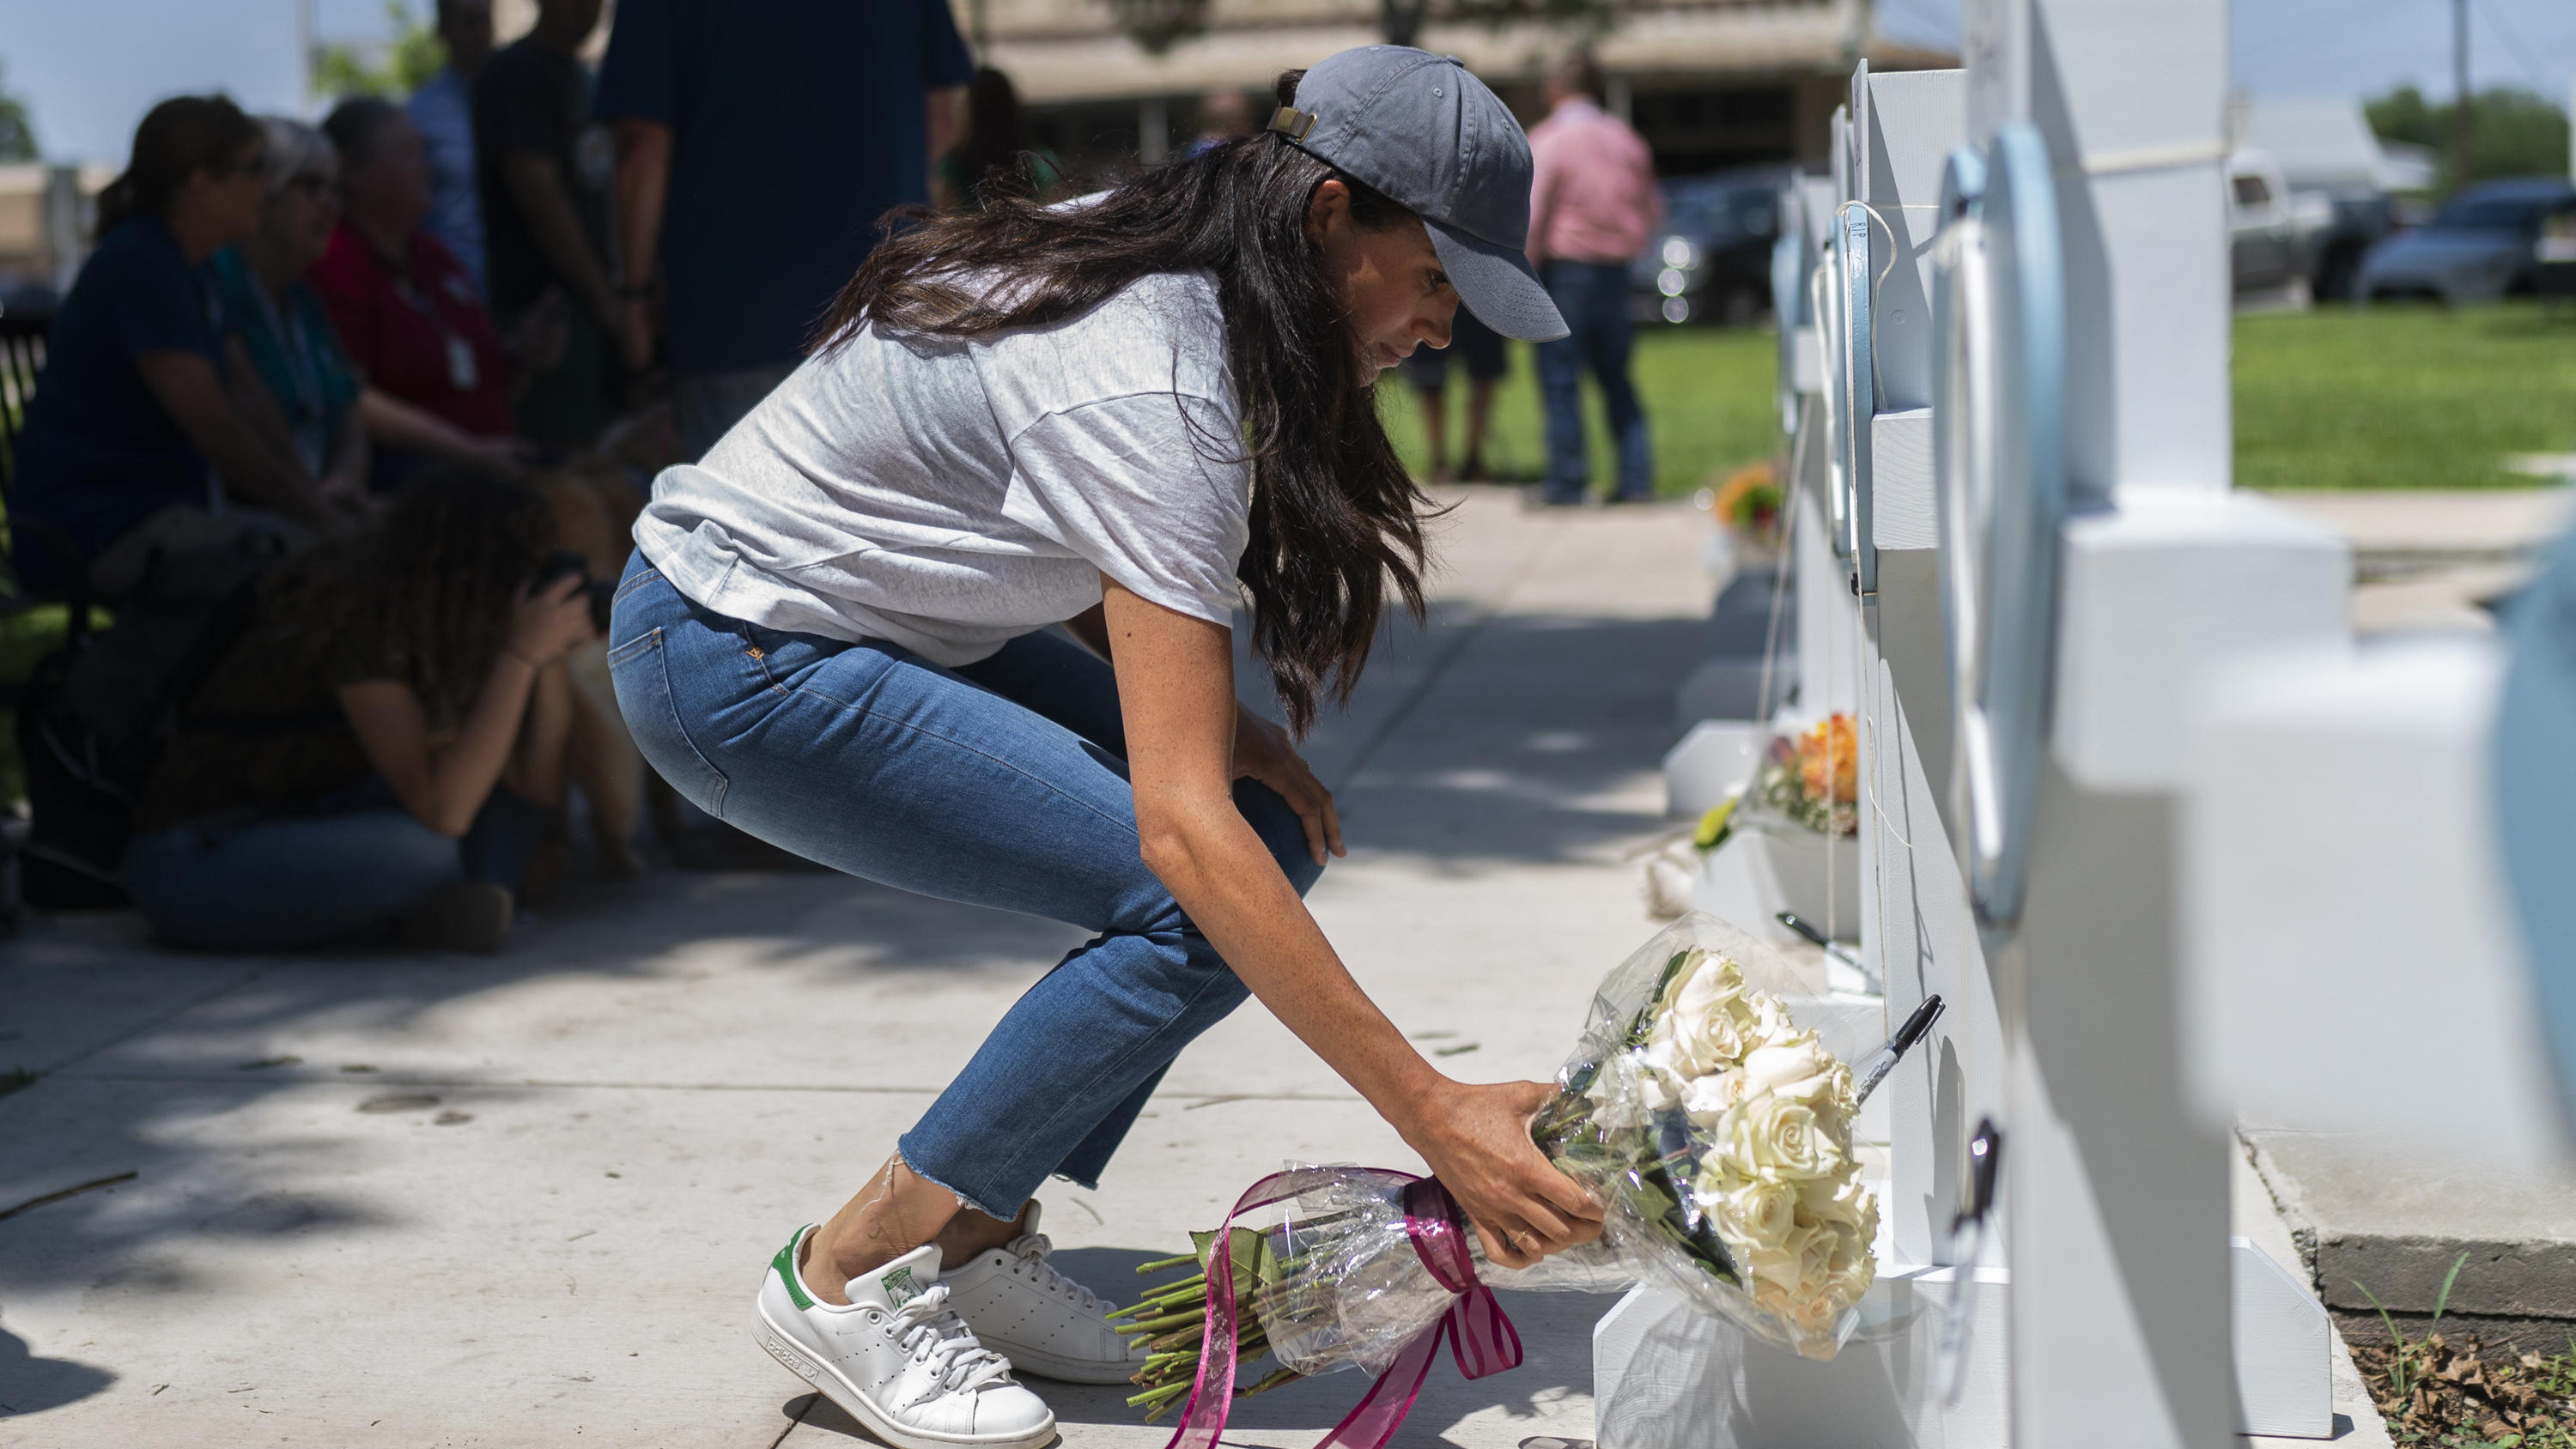 Meghan Markle, Duchess of Sussex, leaves flowers at a memorial site, Thursday, May 26, 2022, for the victims killed in this week's elementary school shooting in Uvalde, Texas. (AP Photo/Jae C. Hong)